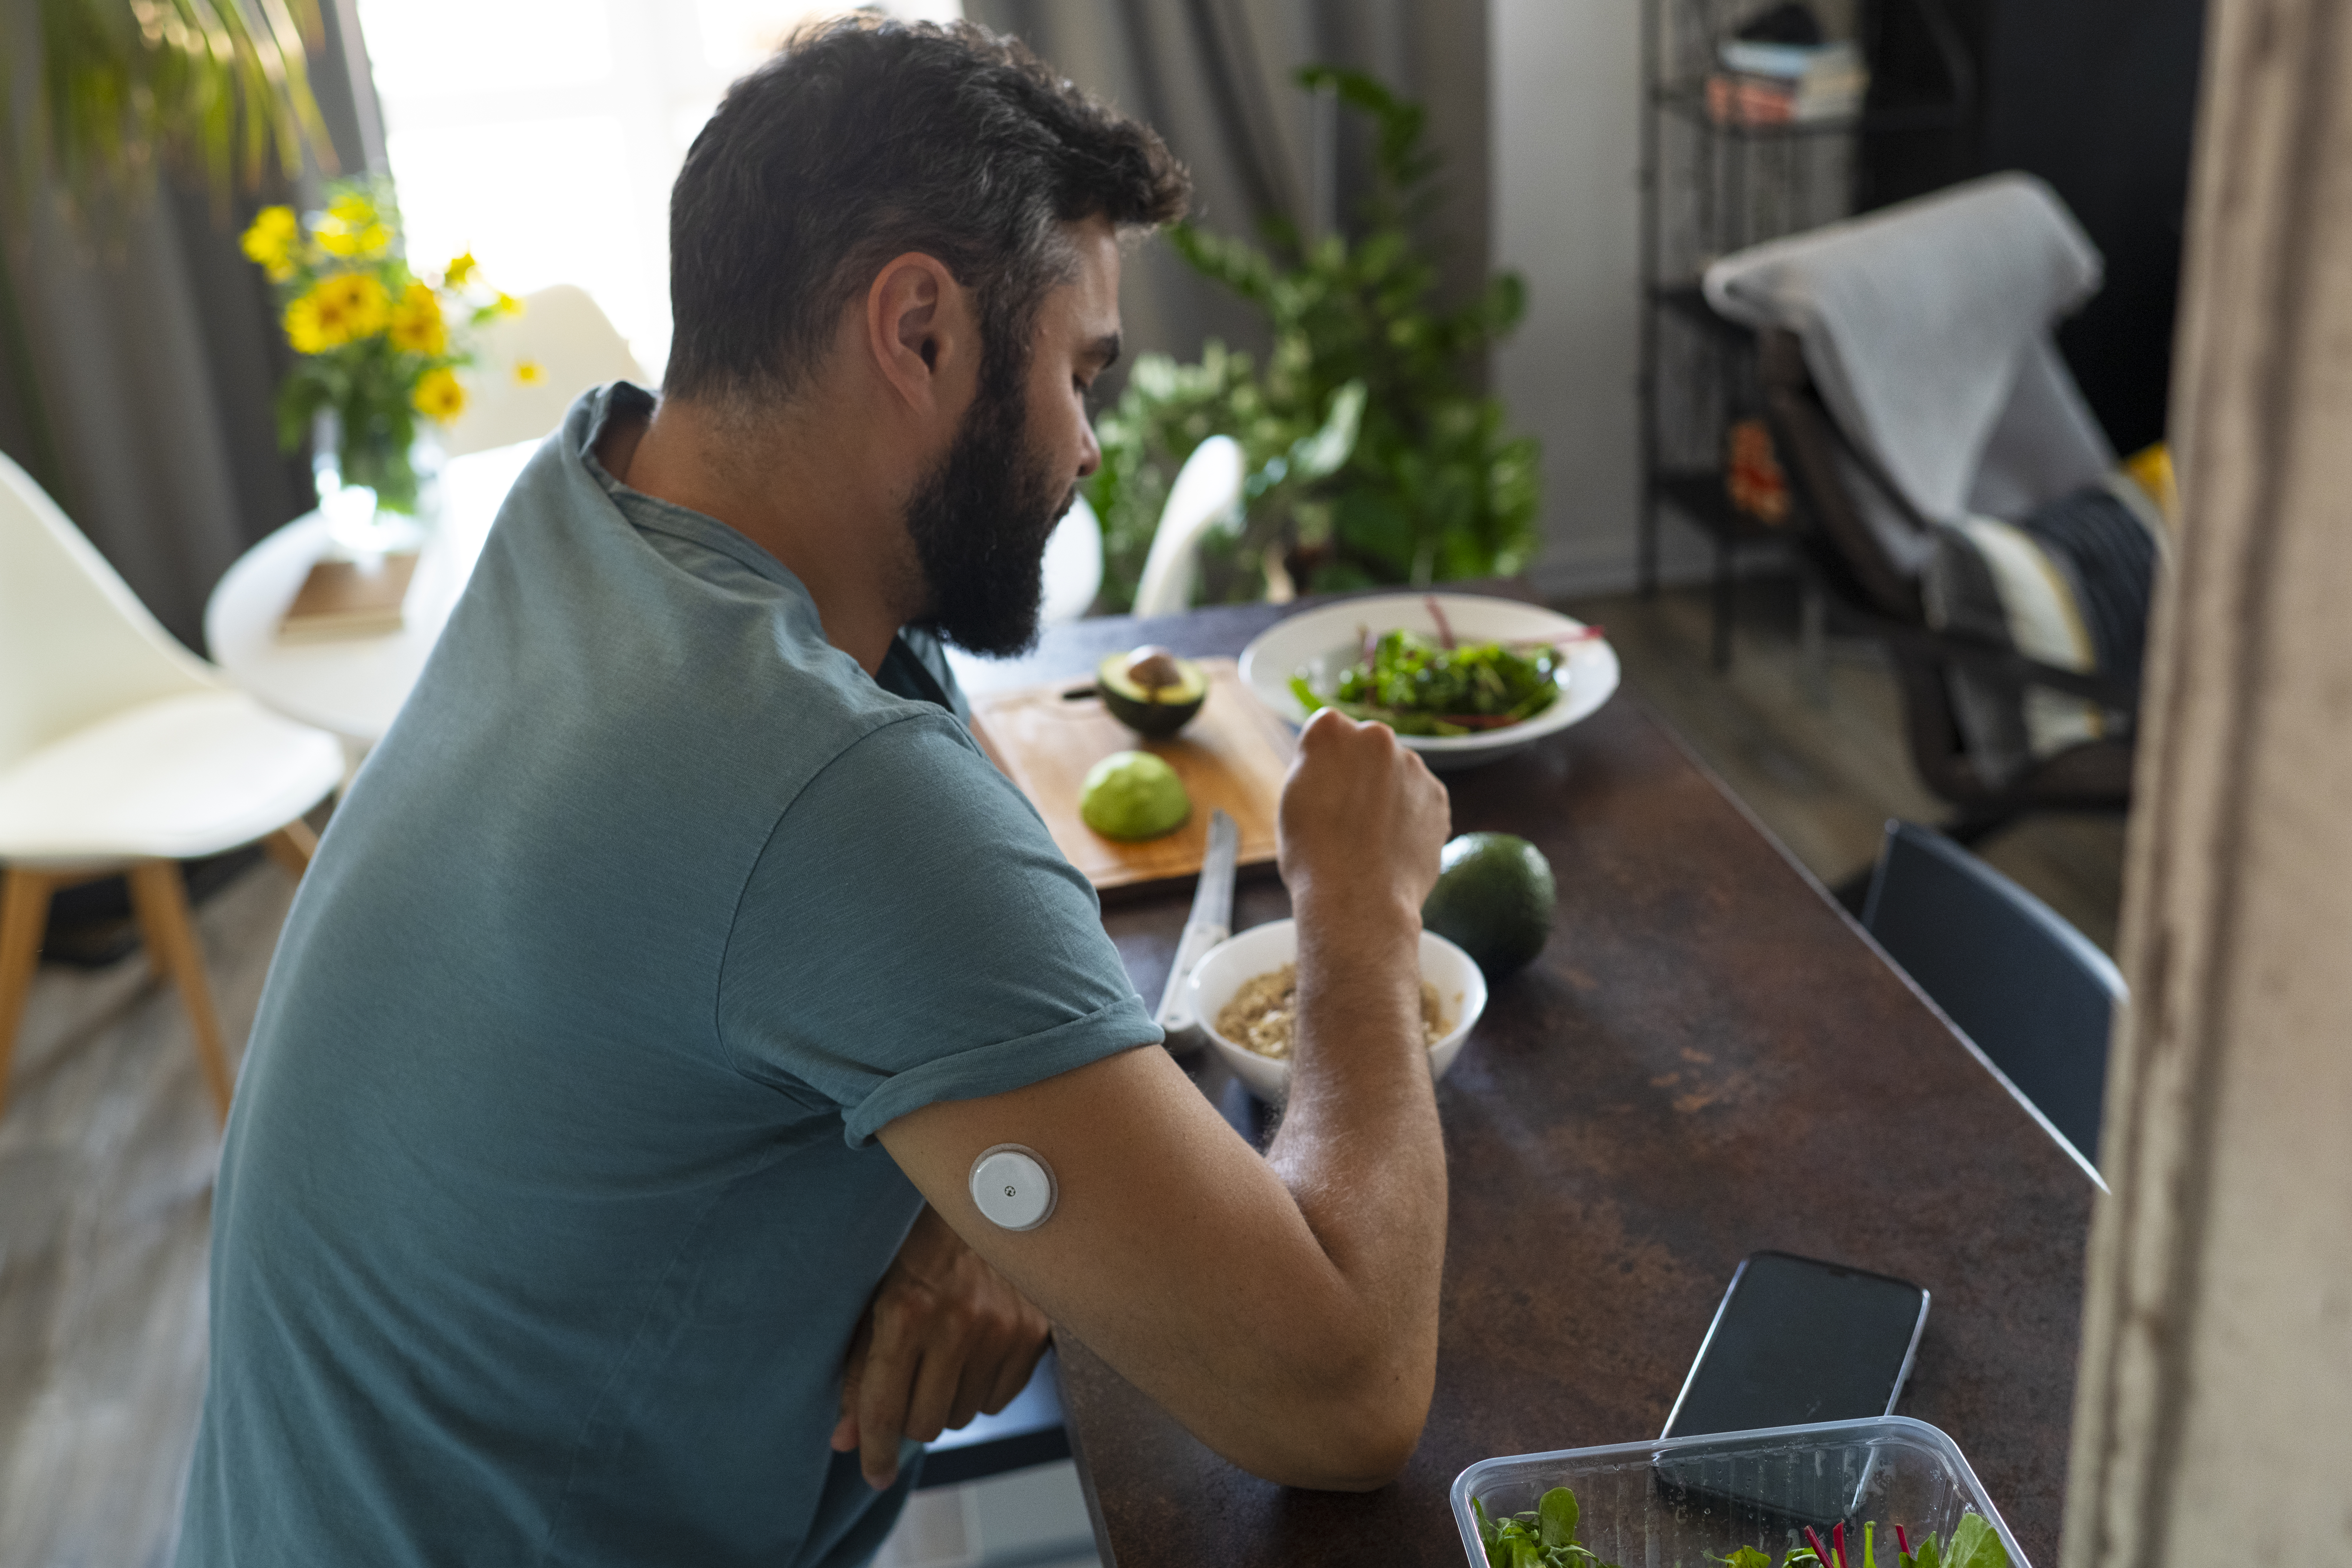 diabetic-man-with-glucose-patch-sensor-preparing-meal